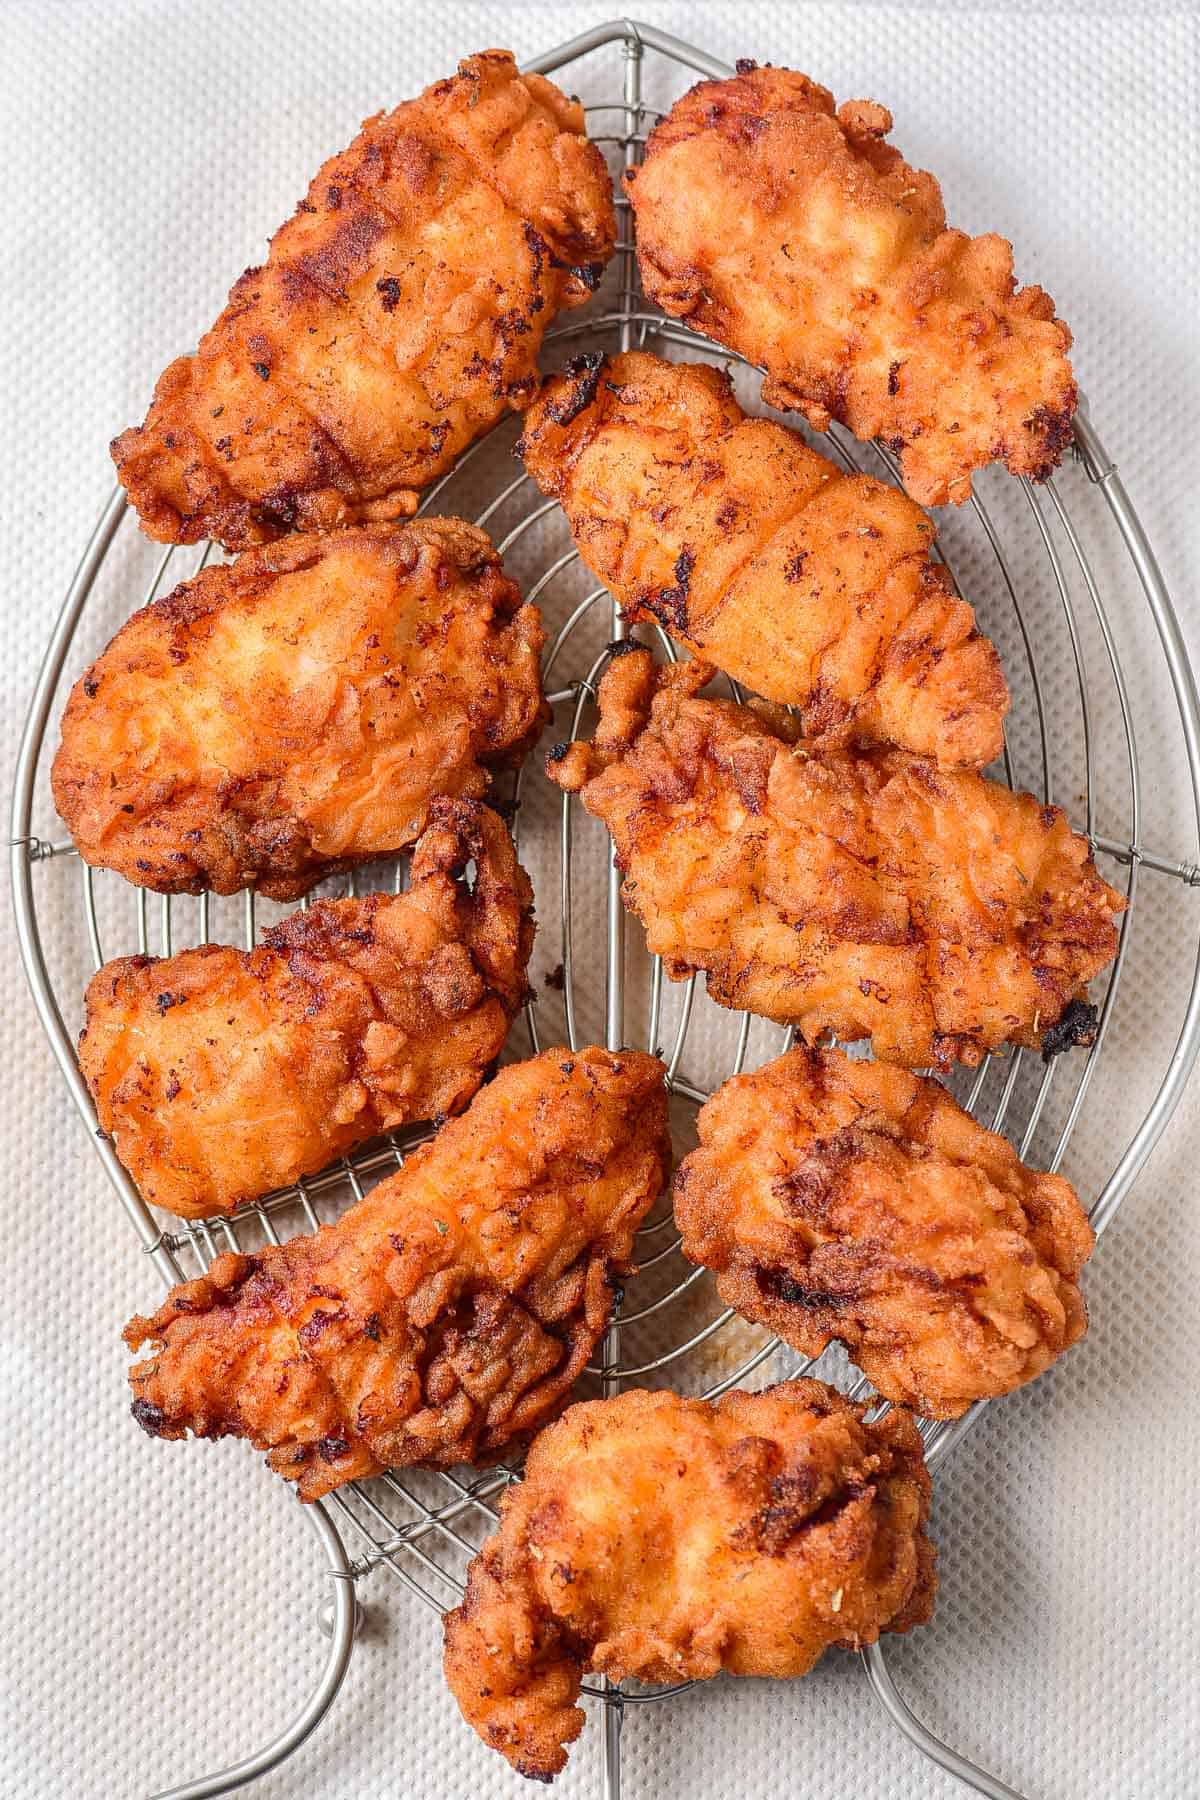 Draining fried chicken on a rack.